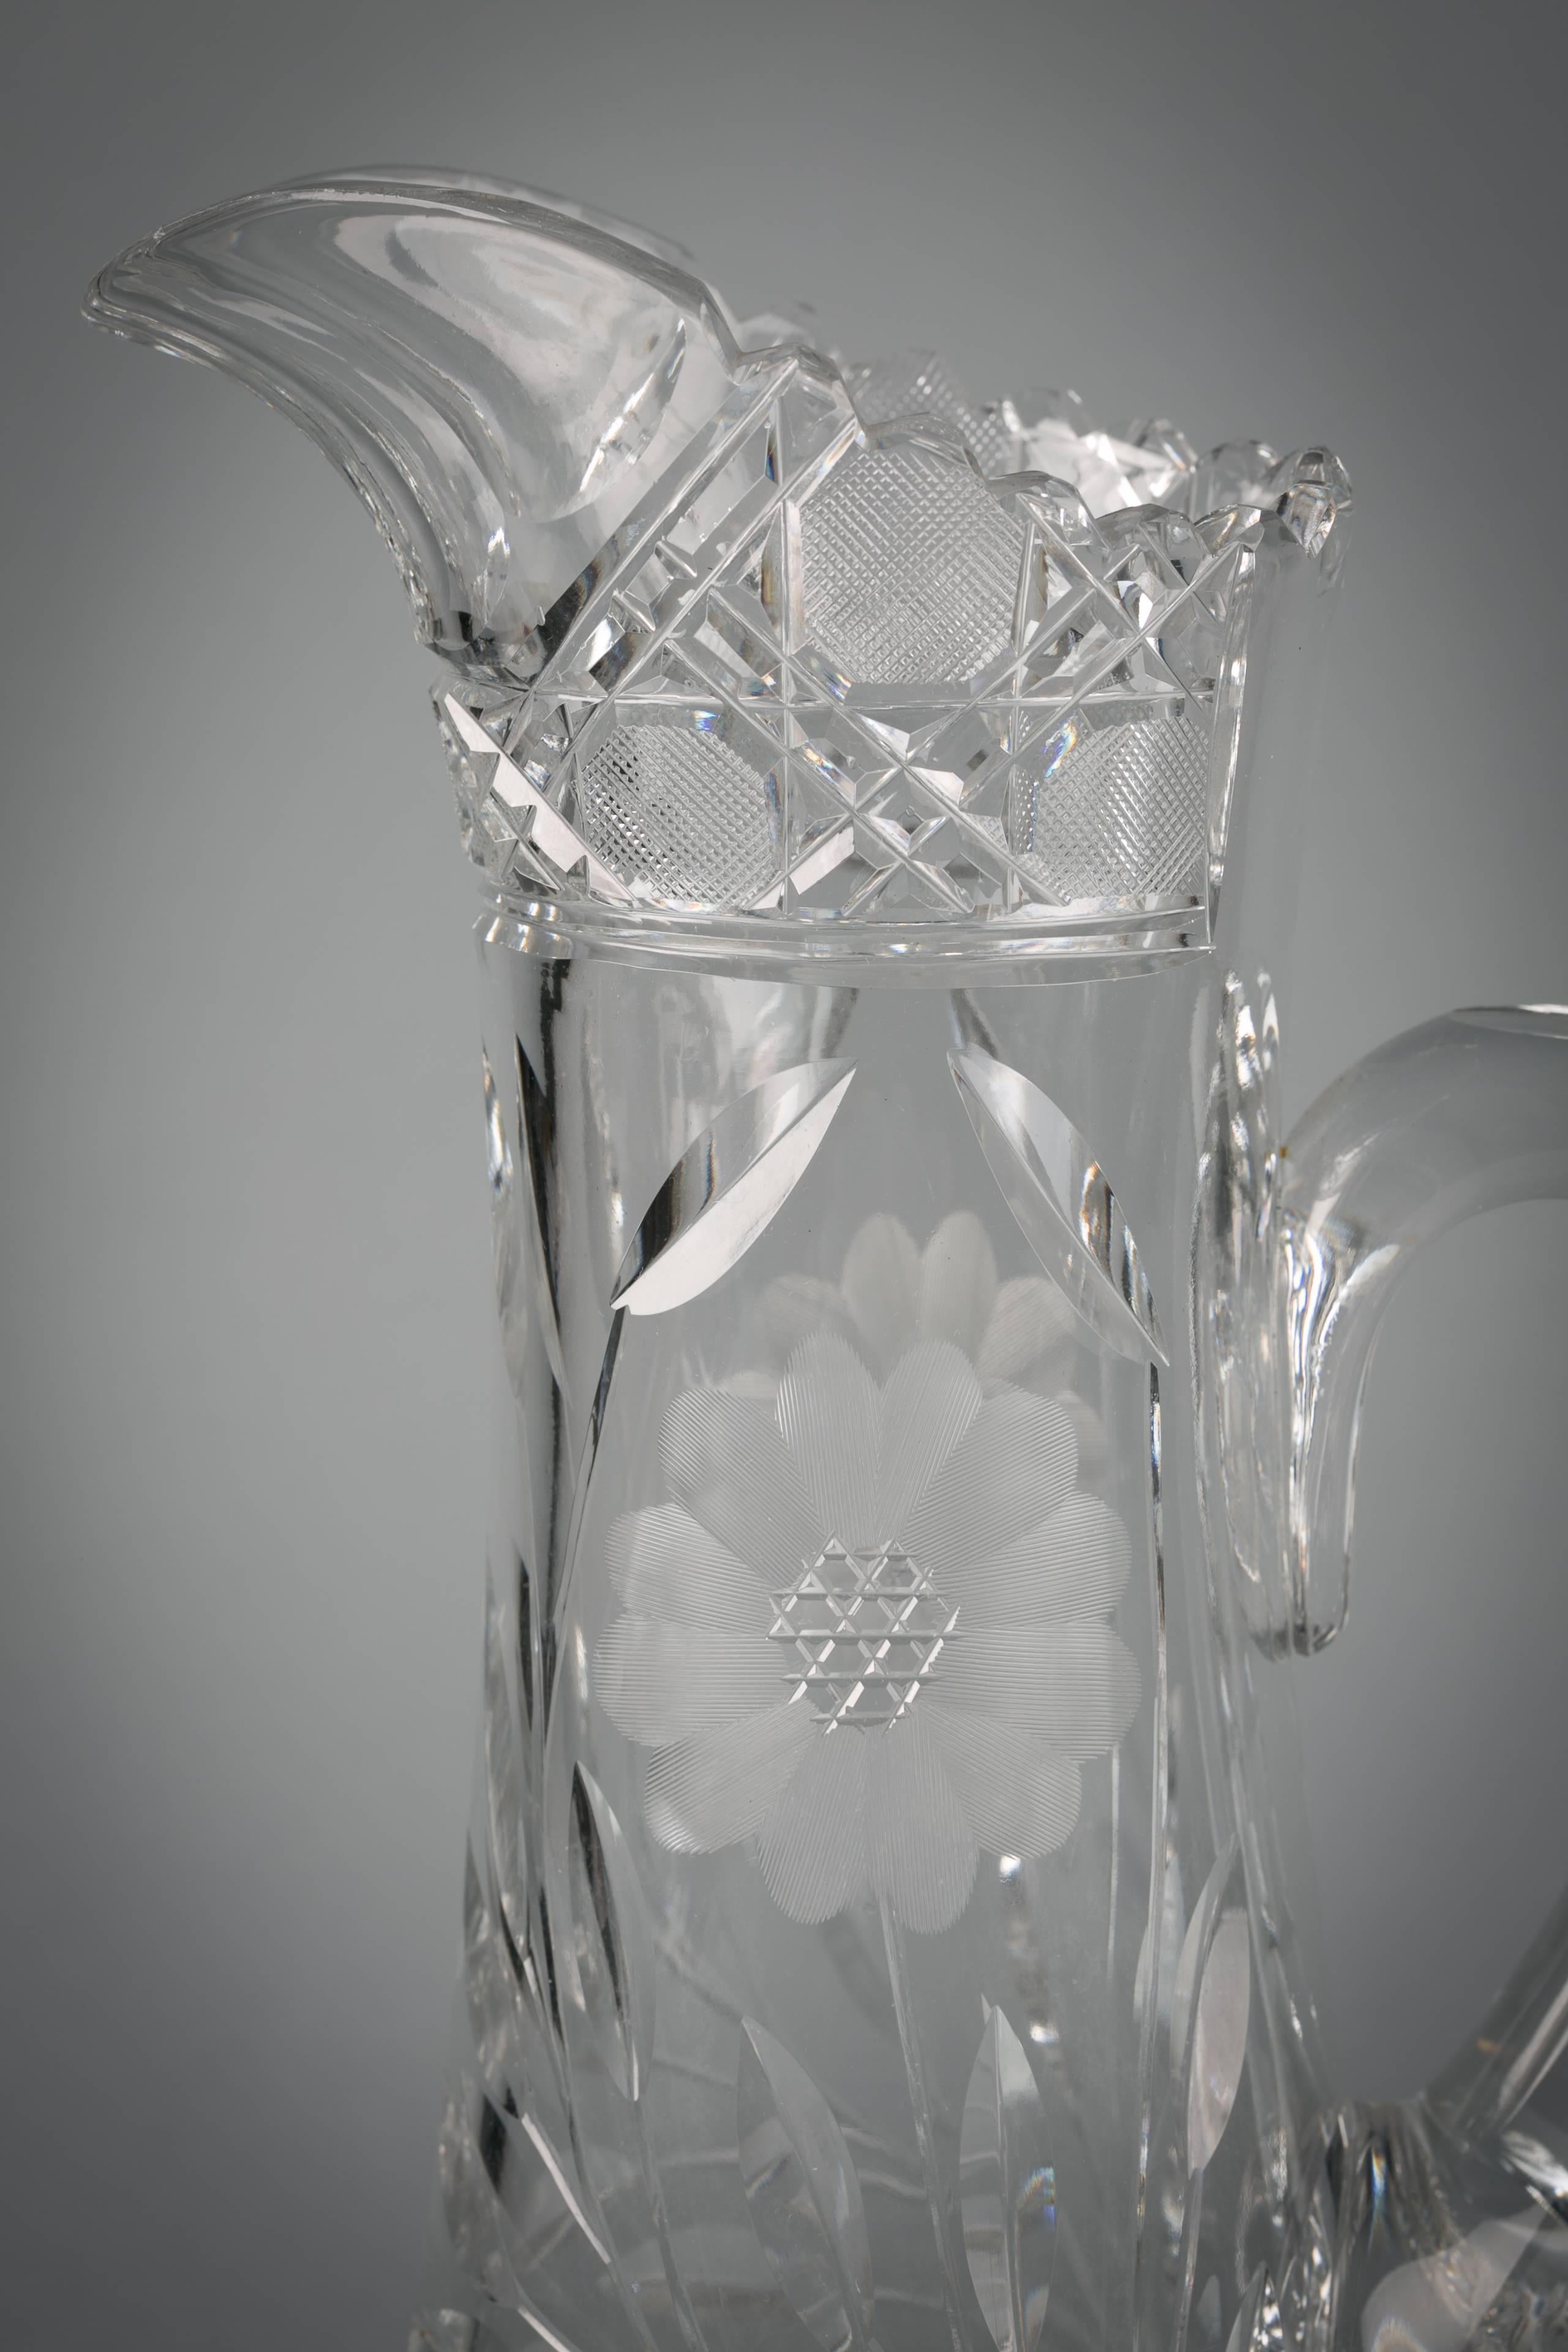 From the Early 20th Century Minor Damage of about 1 Nicely Priced. Vintage 8\u00d77 14\u00d74 Cut Glass Pitcher View all Pictures Carefully